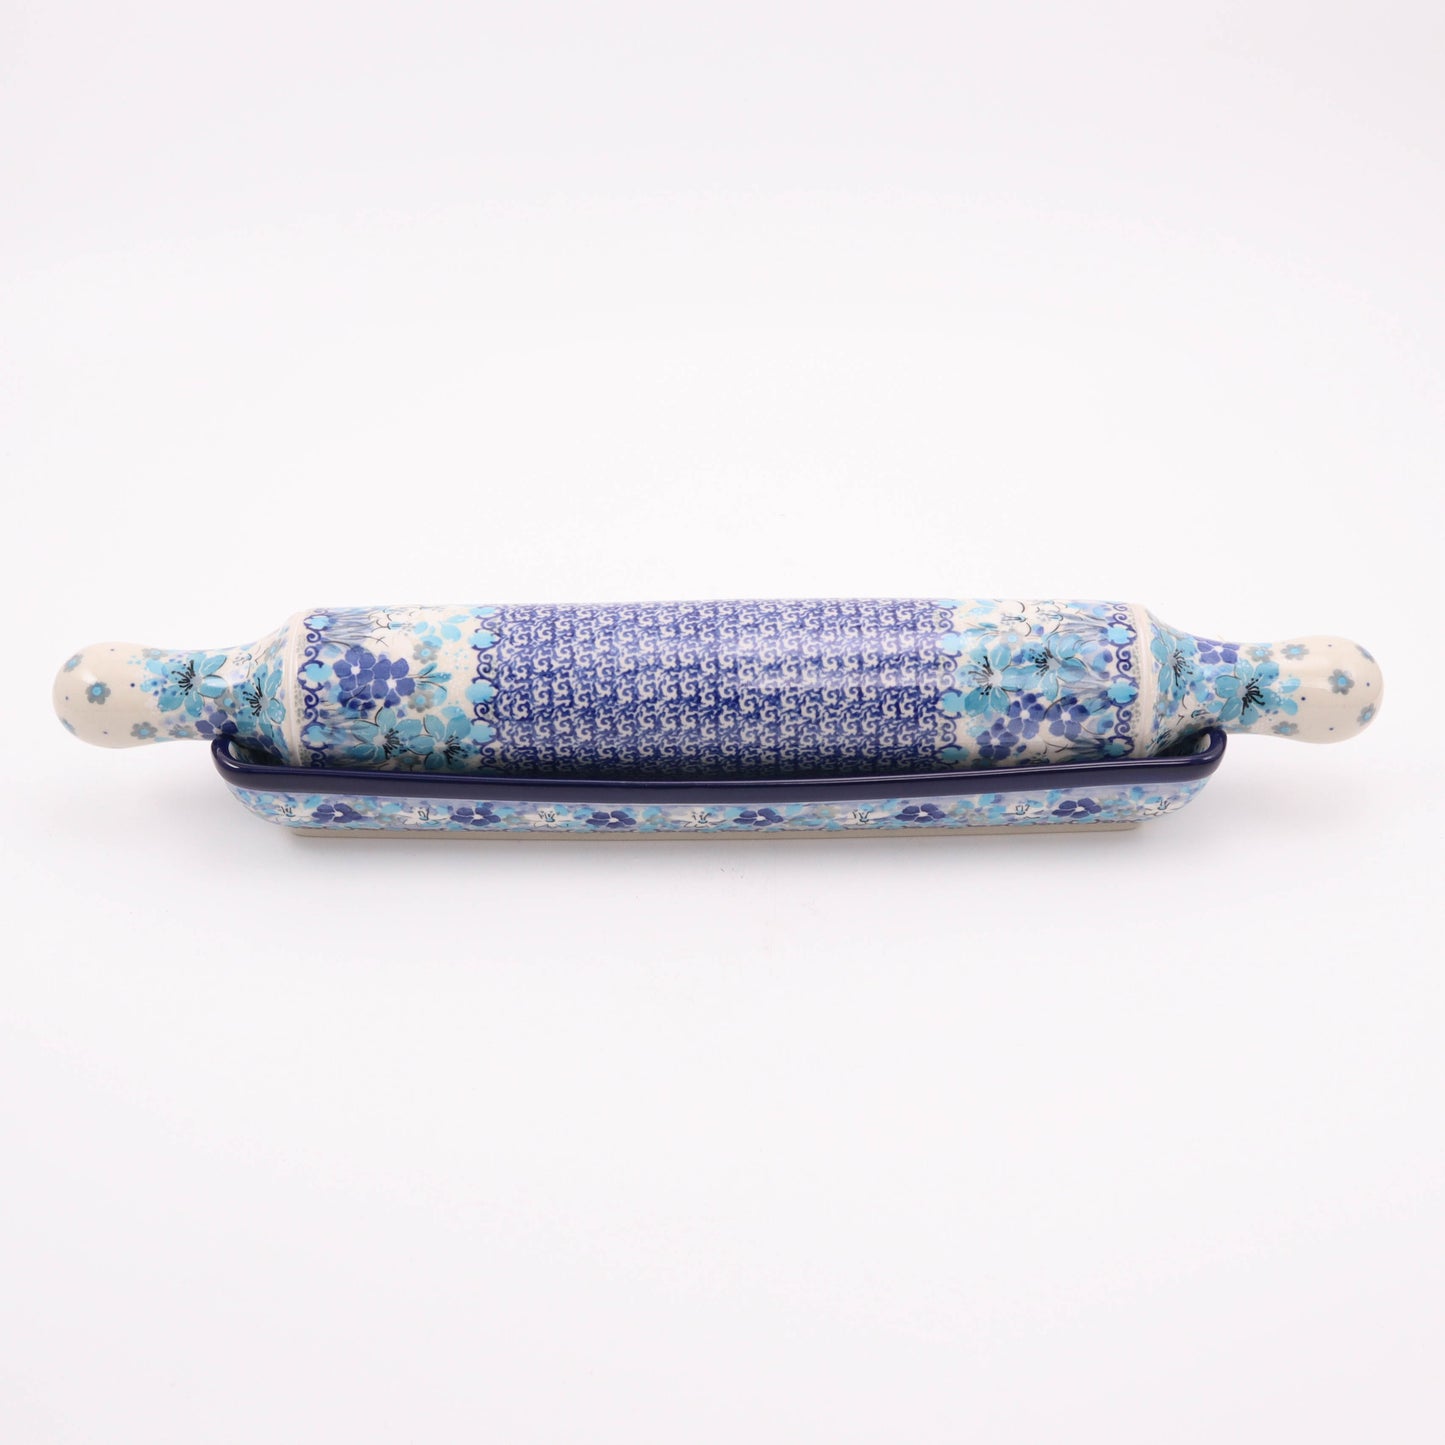 18" Rolling Pin with Cradle. Pattern: Dragonfly Meadow